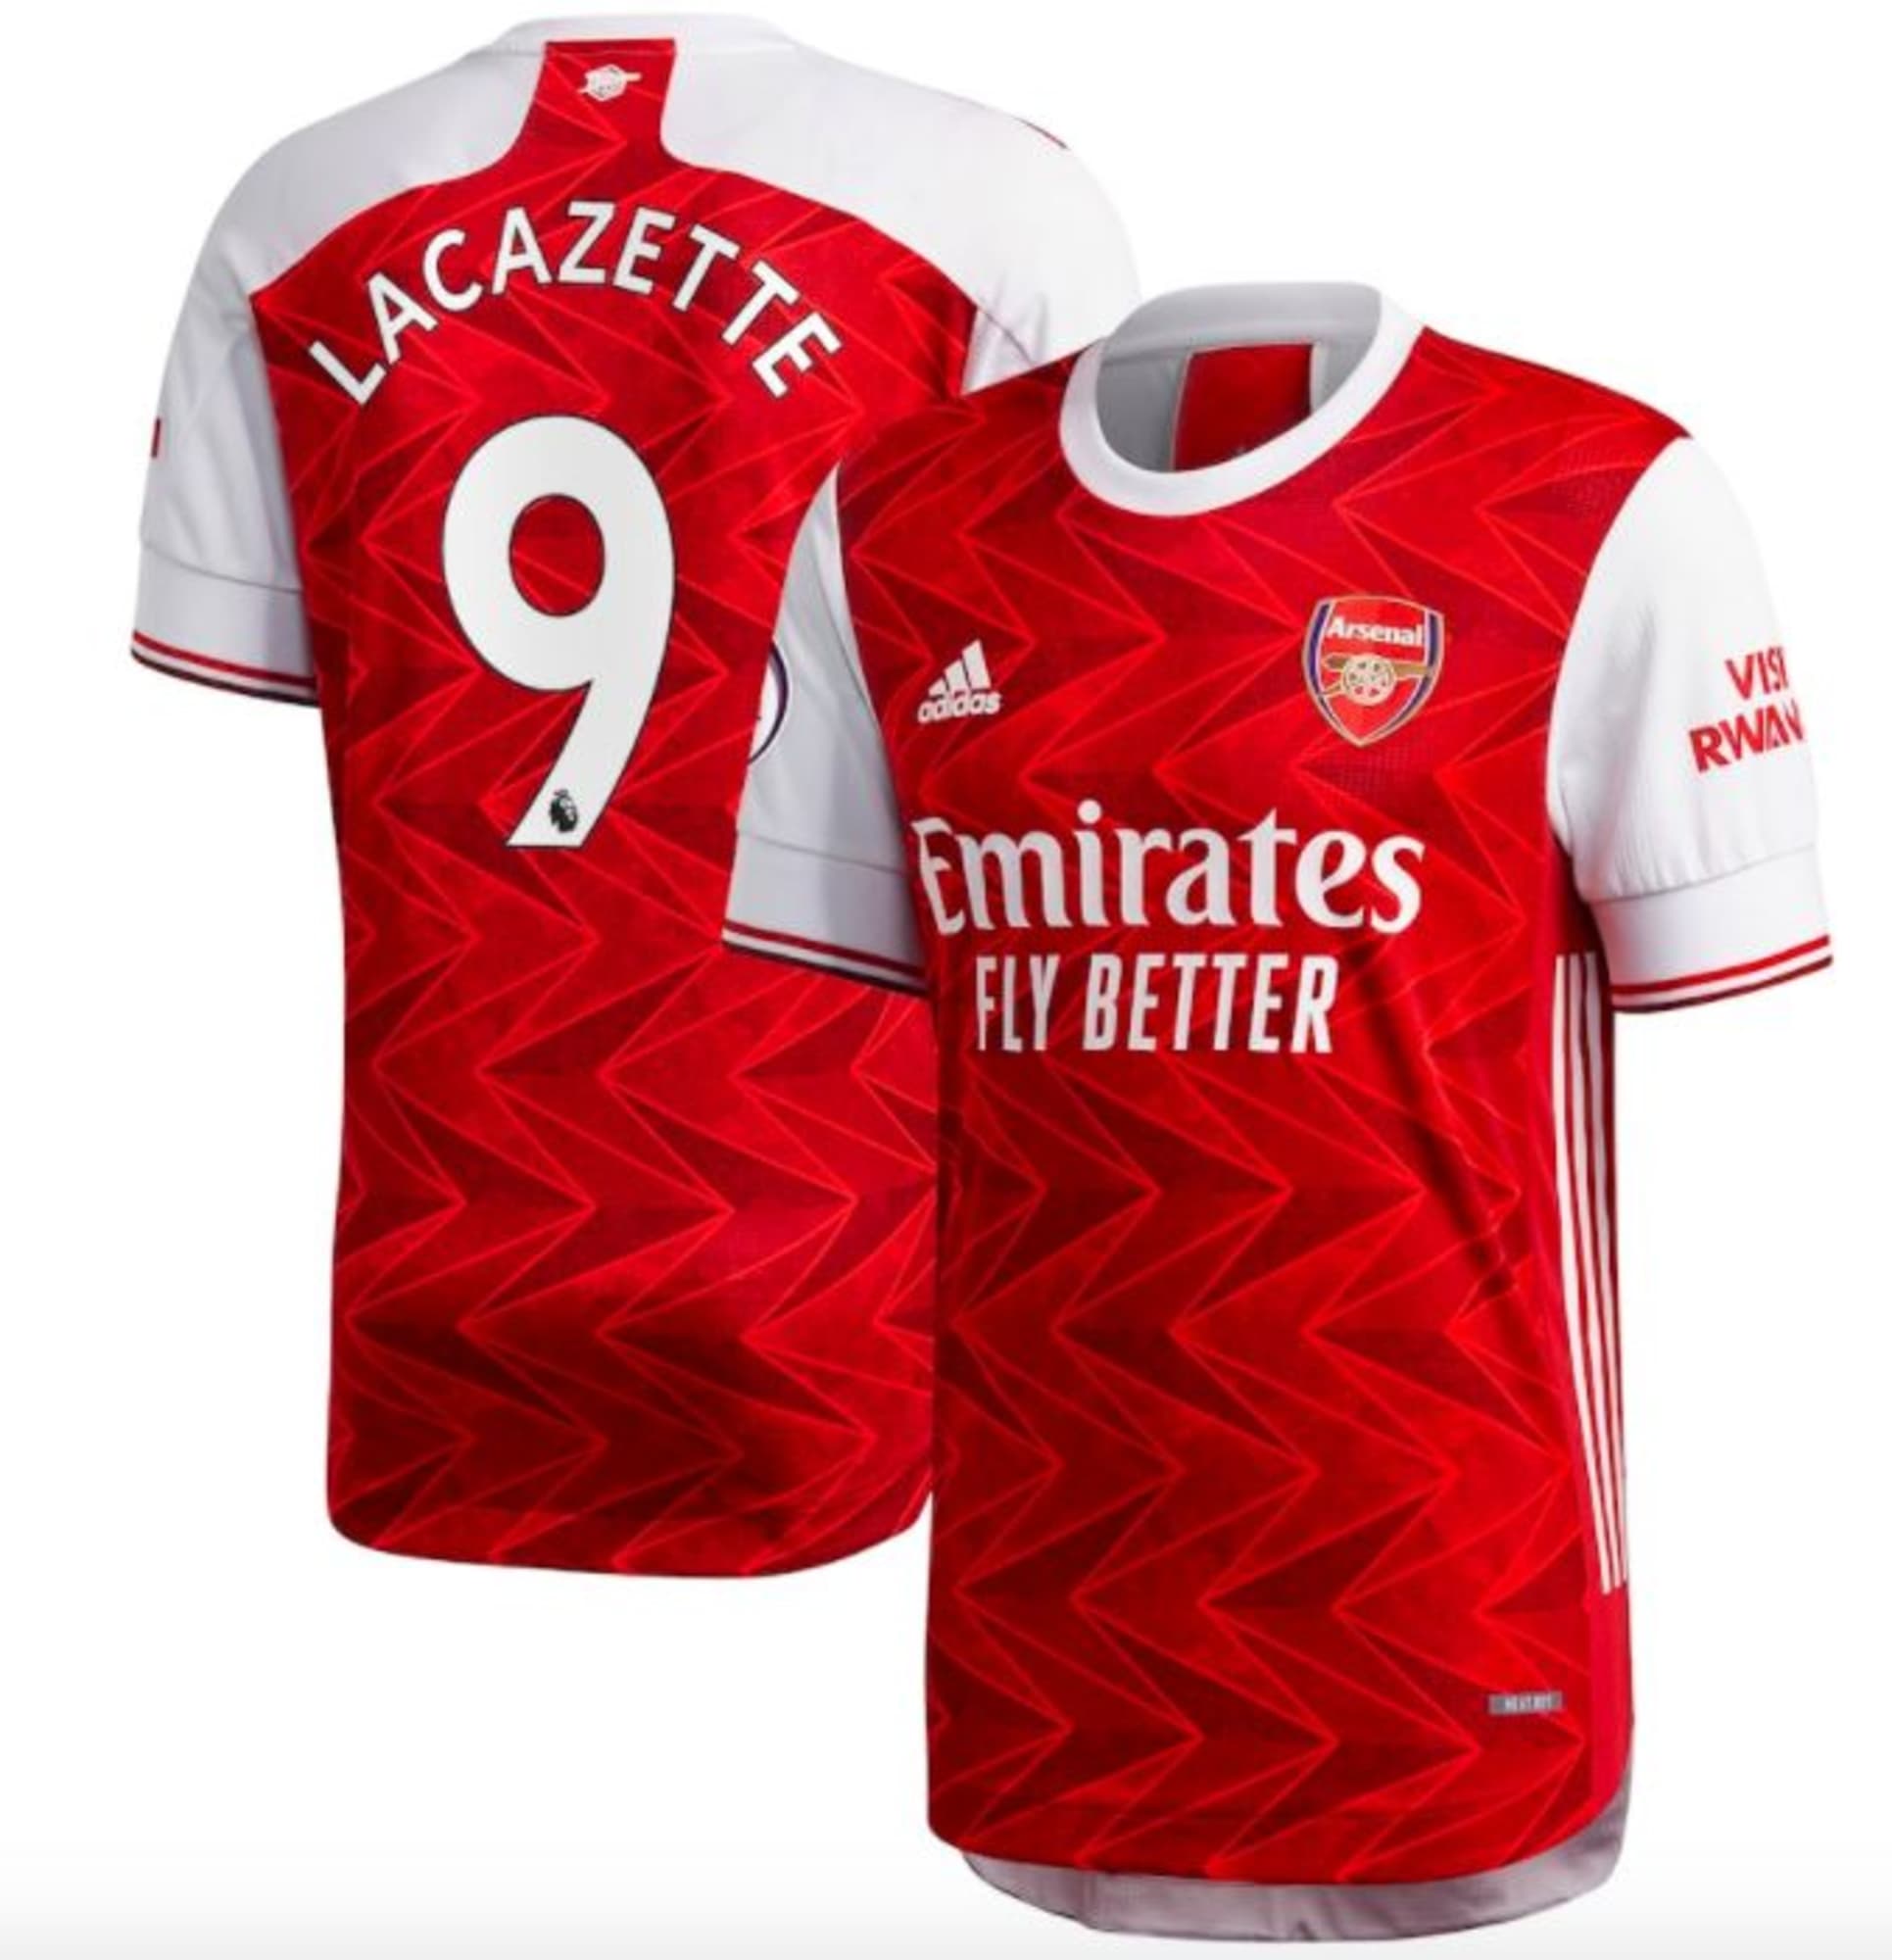 Arsenal New Kit Arsenal S 2020 21 Kit New Home And Away Jersey Styles